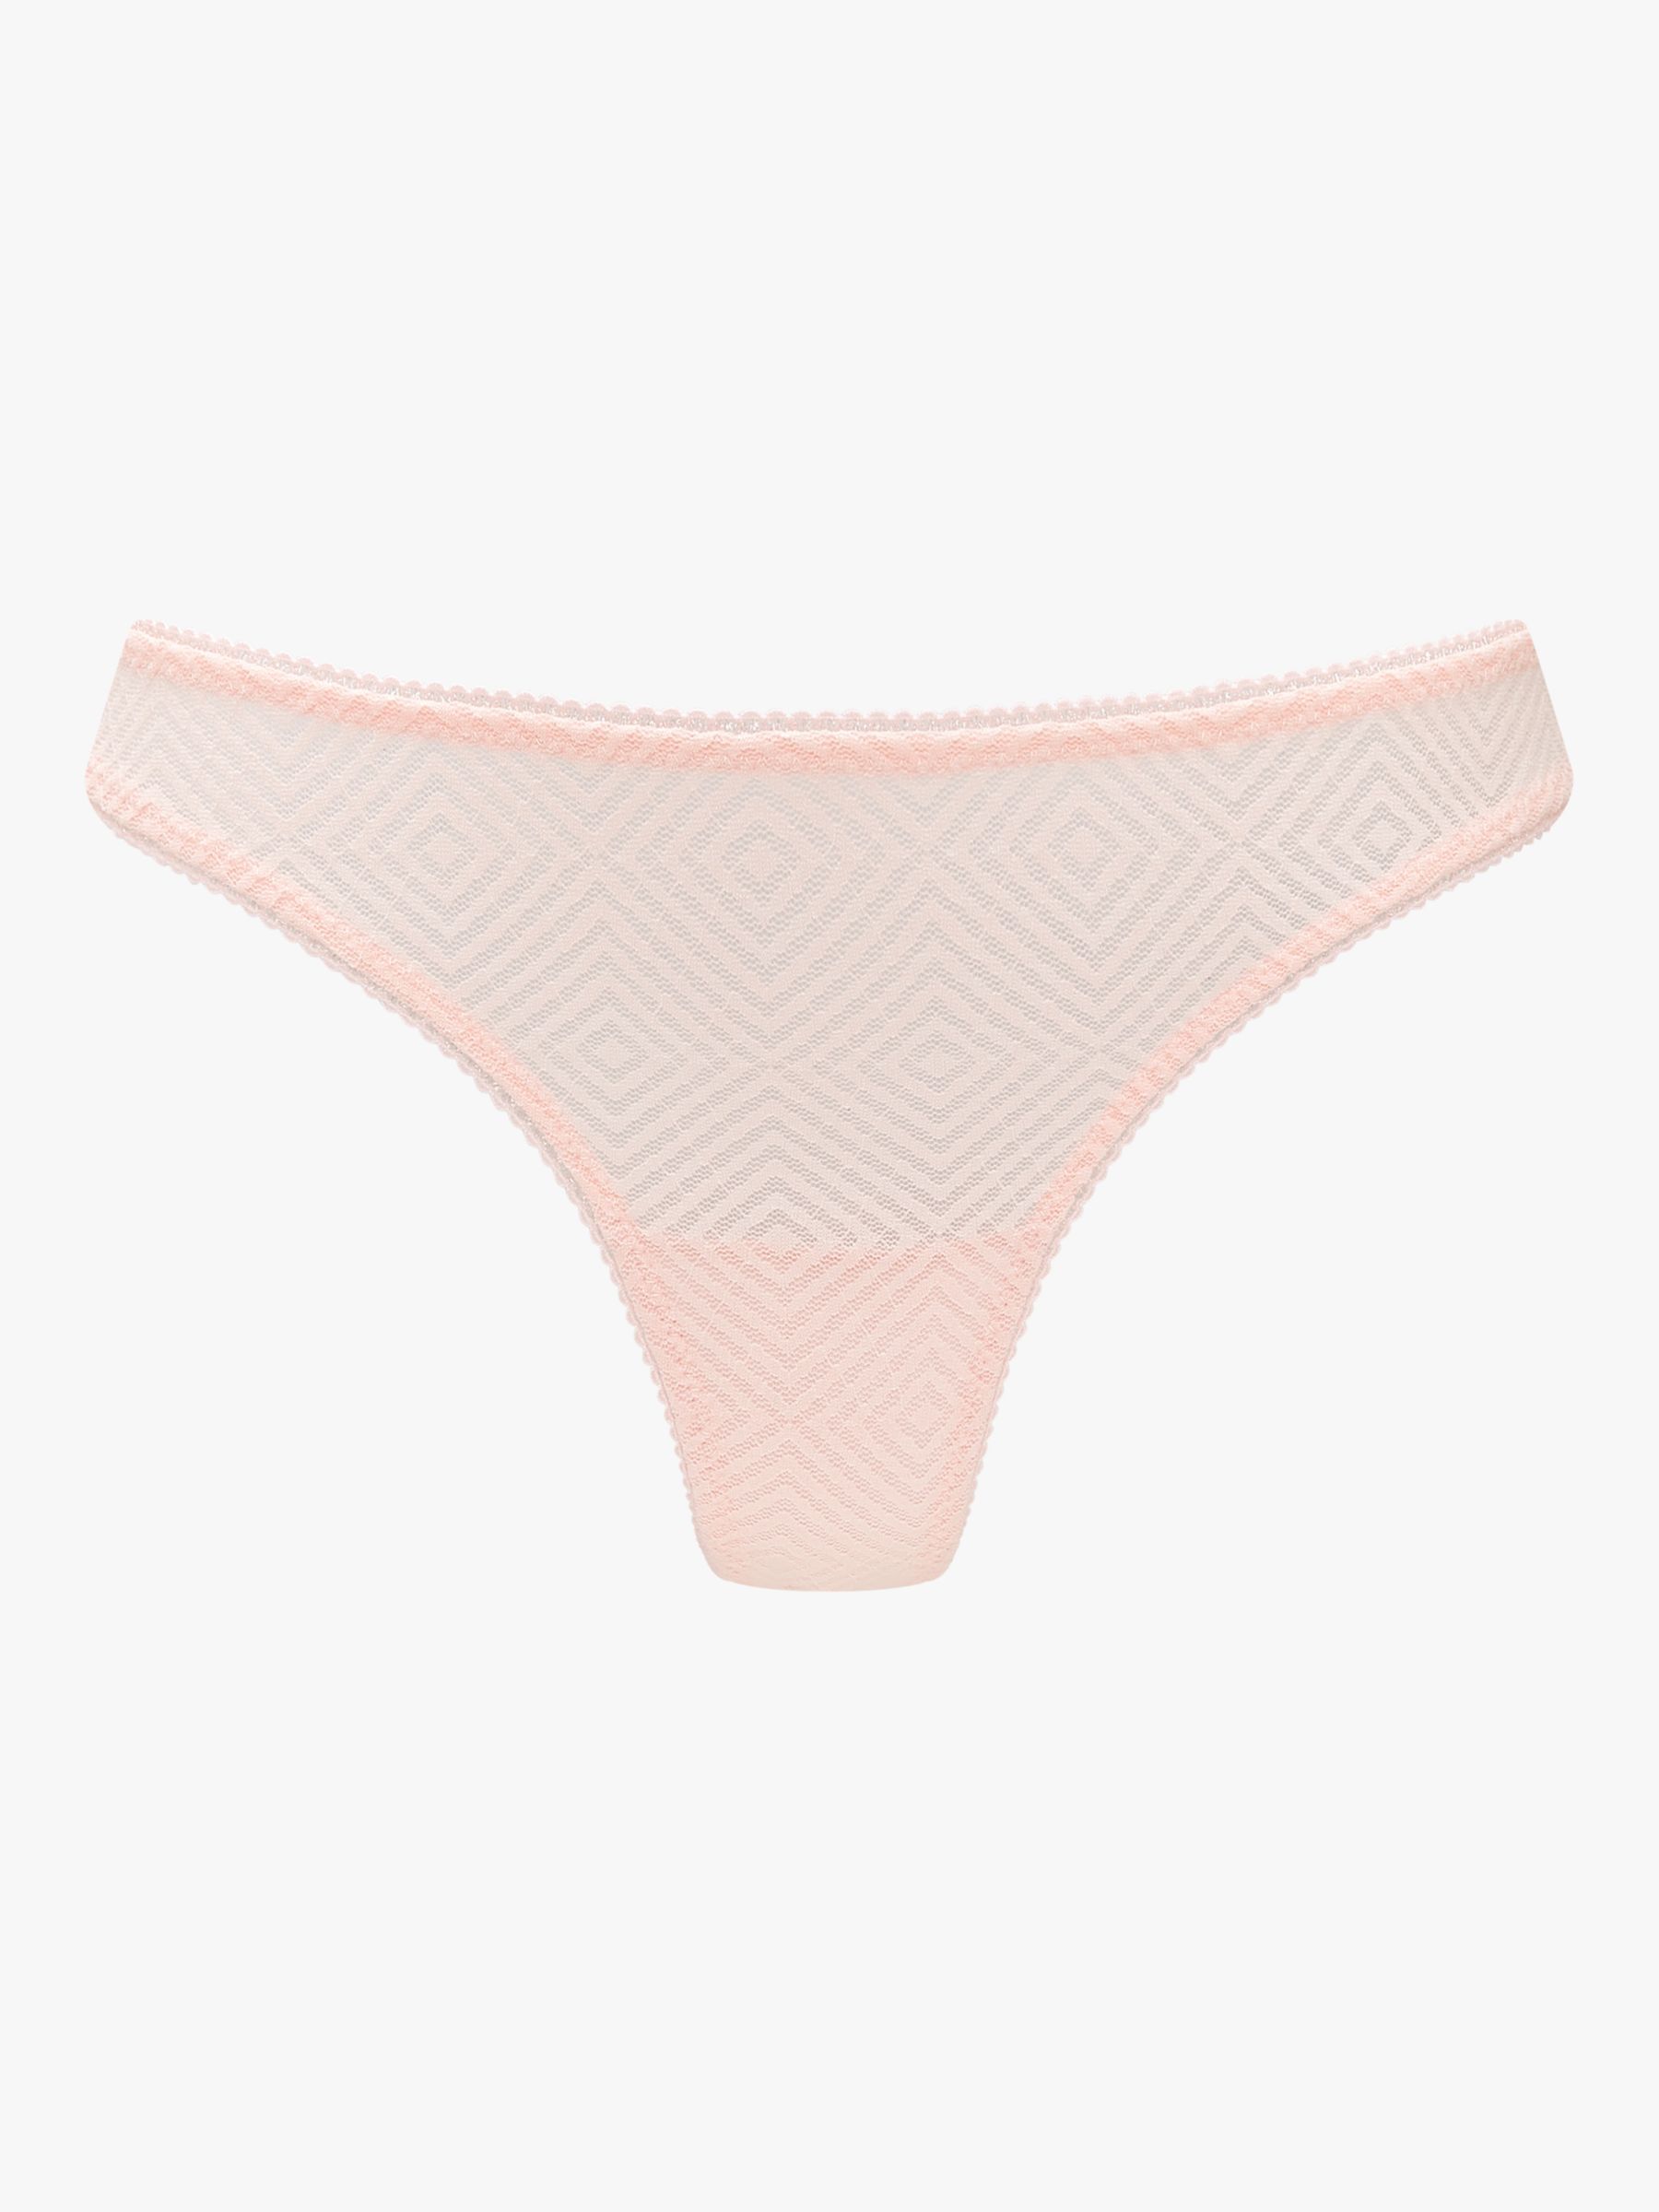 Nudea Barely There Thong, Blush Pink at John Lewis & Partners